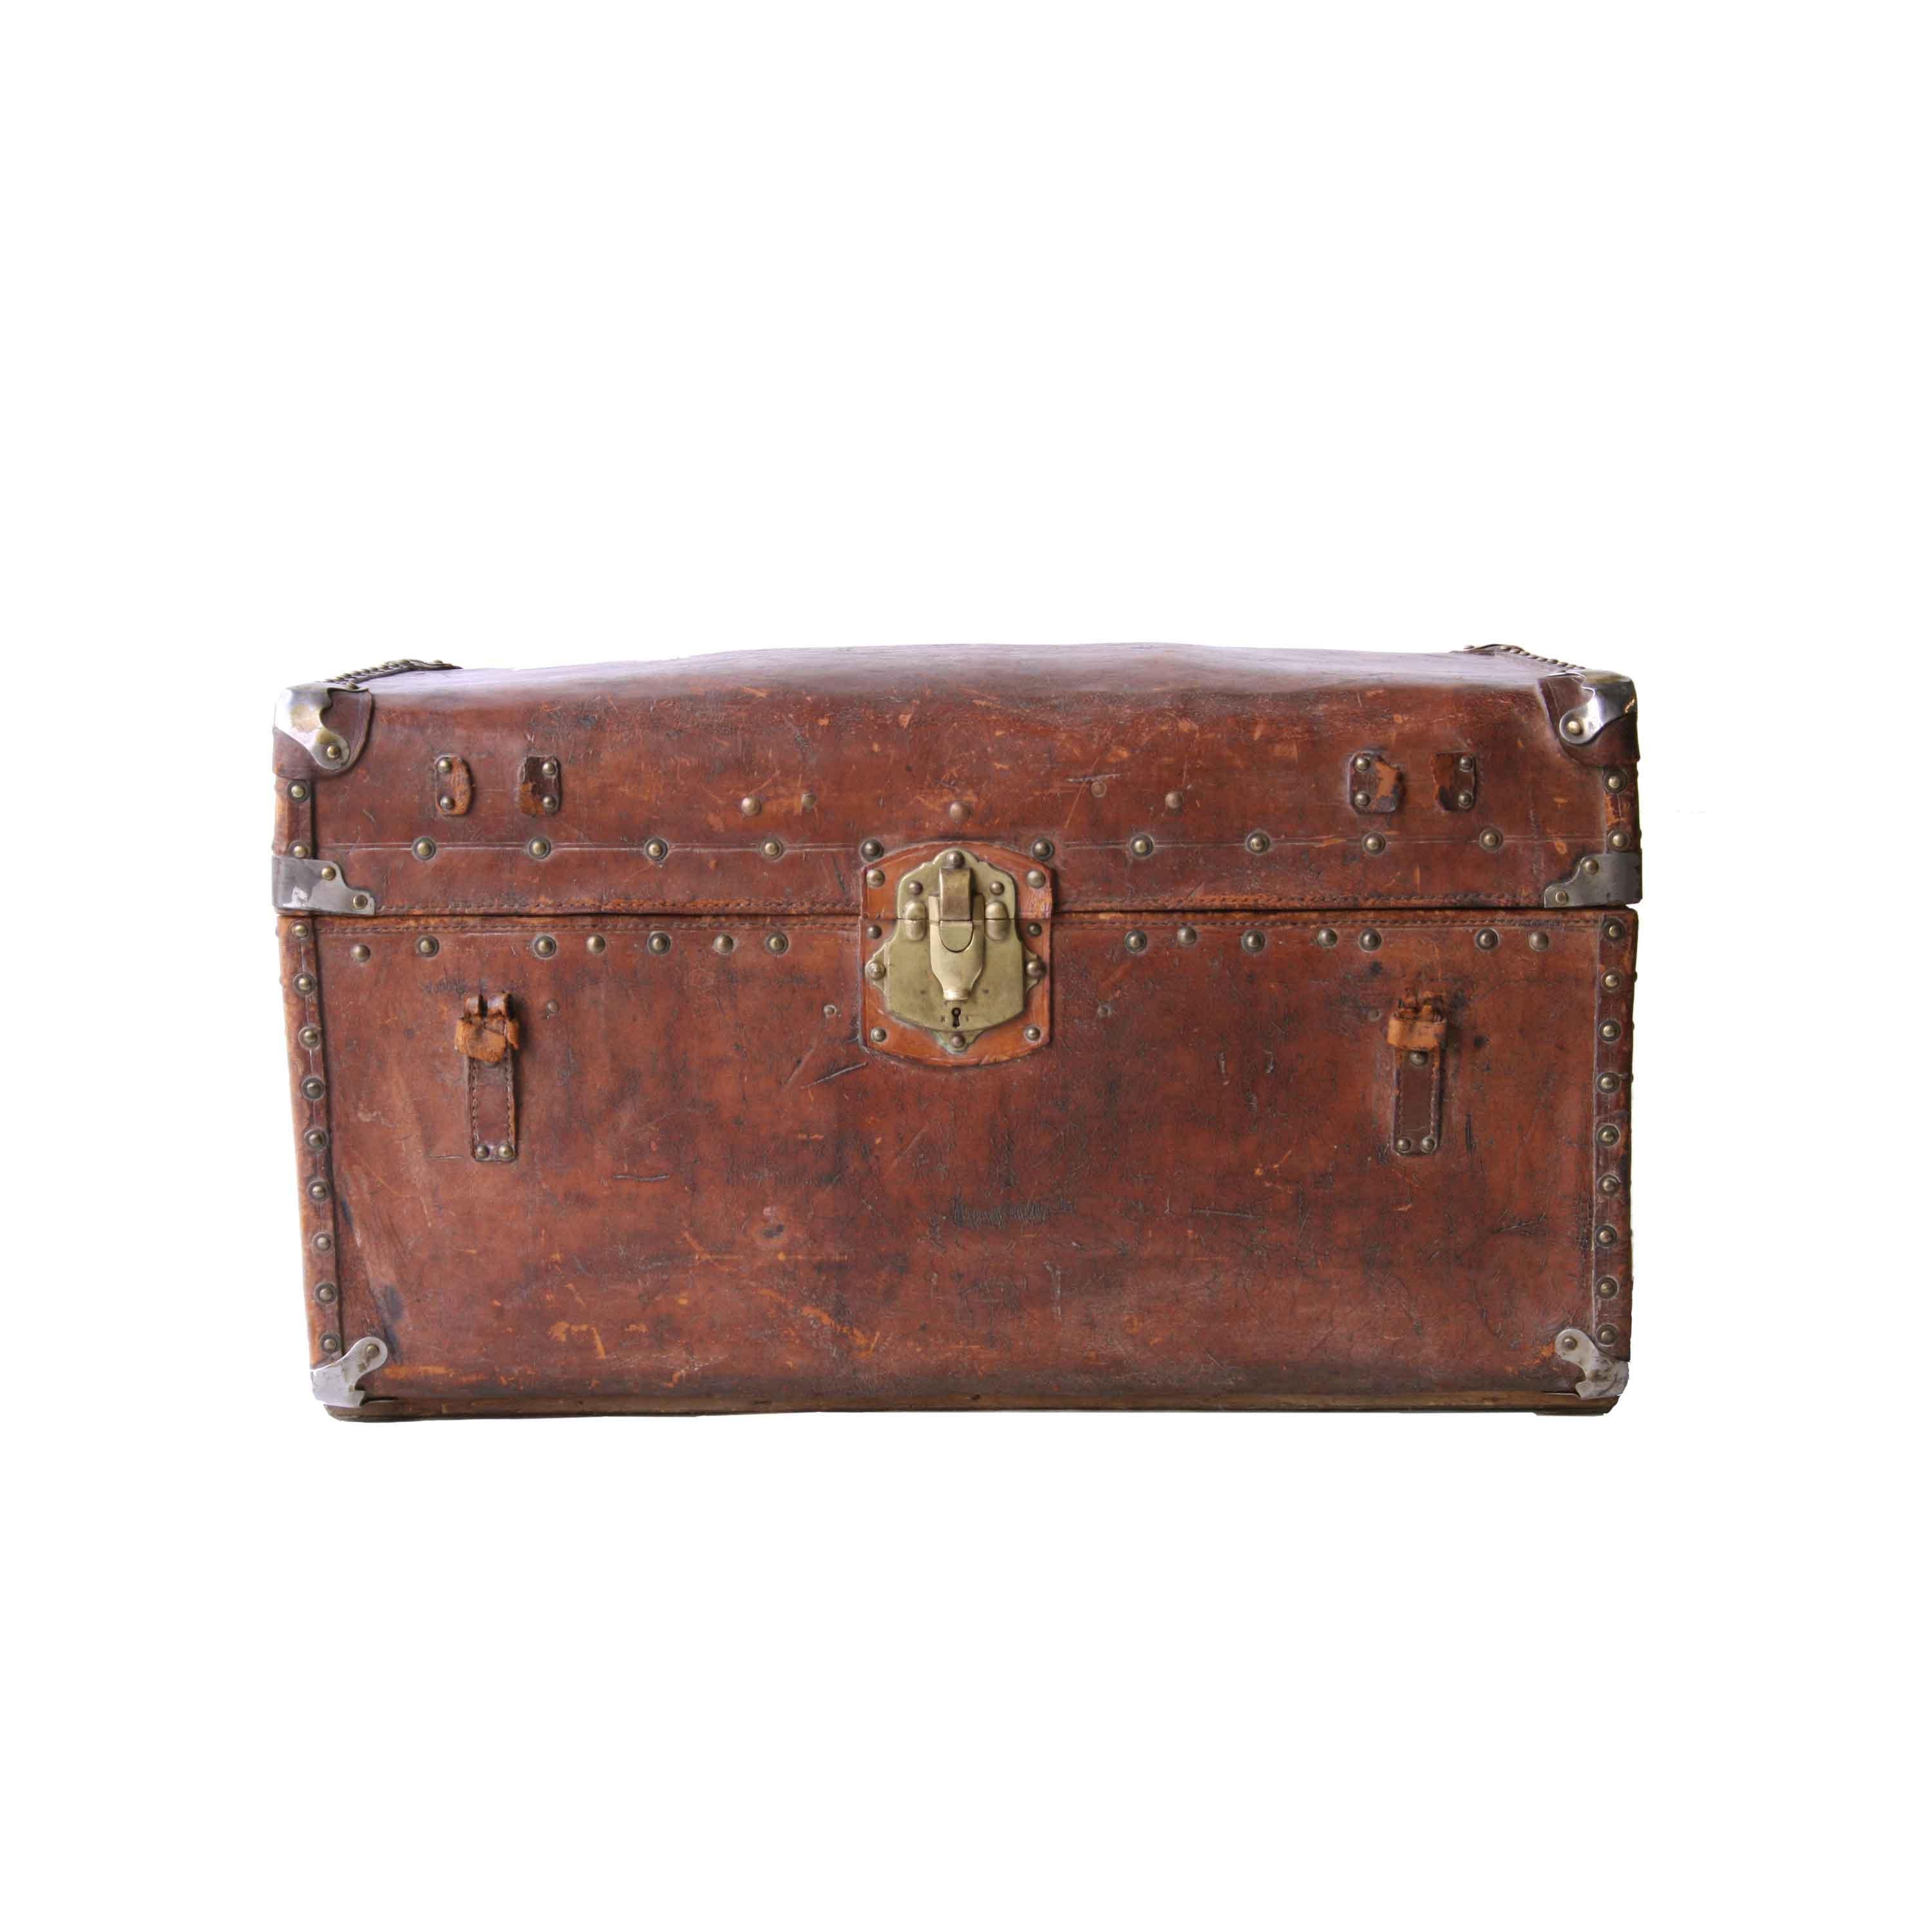 Haitian trunk made in leather and metal details.